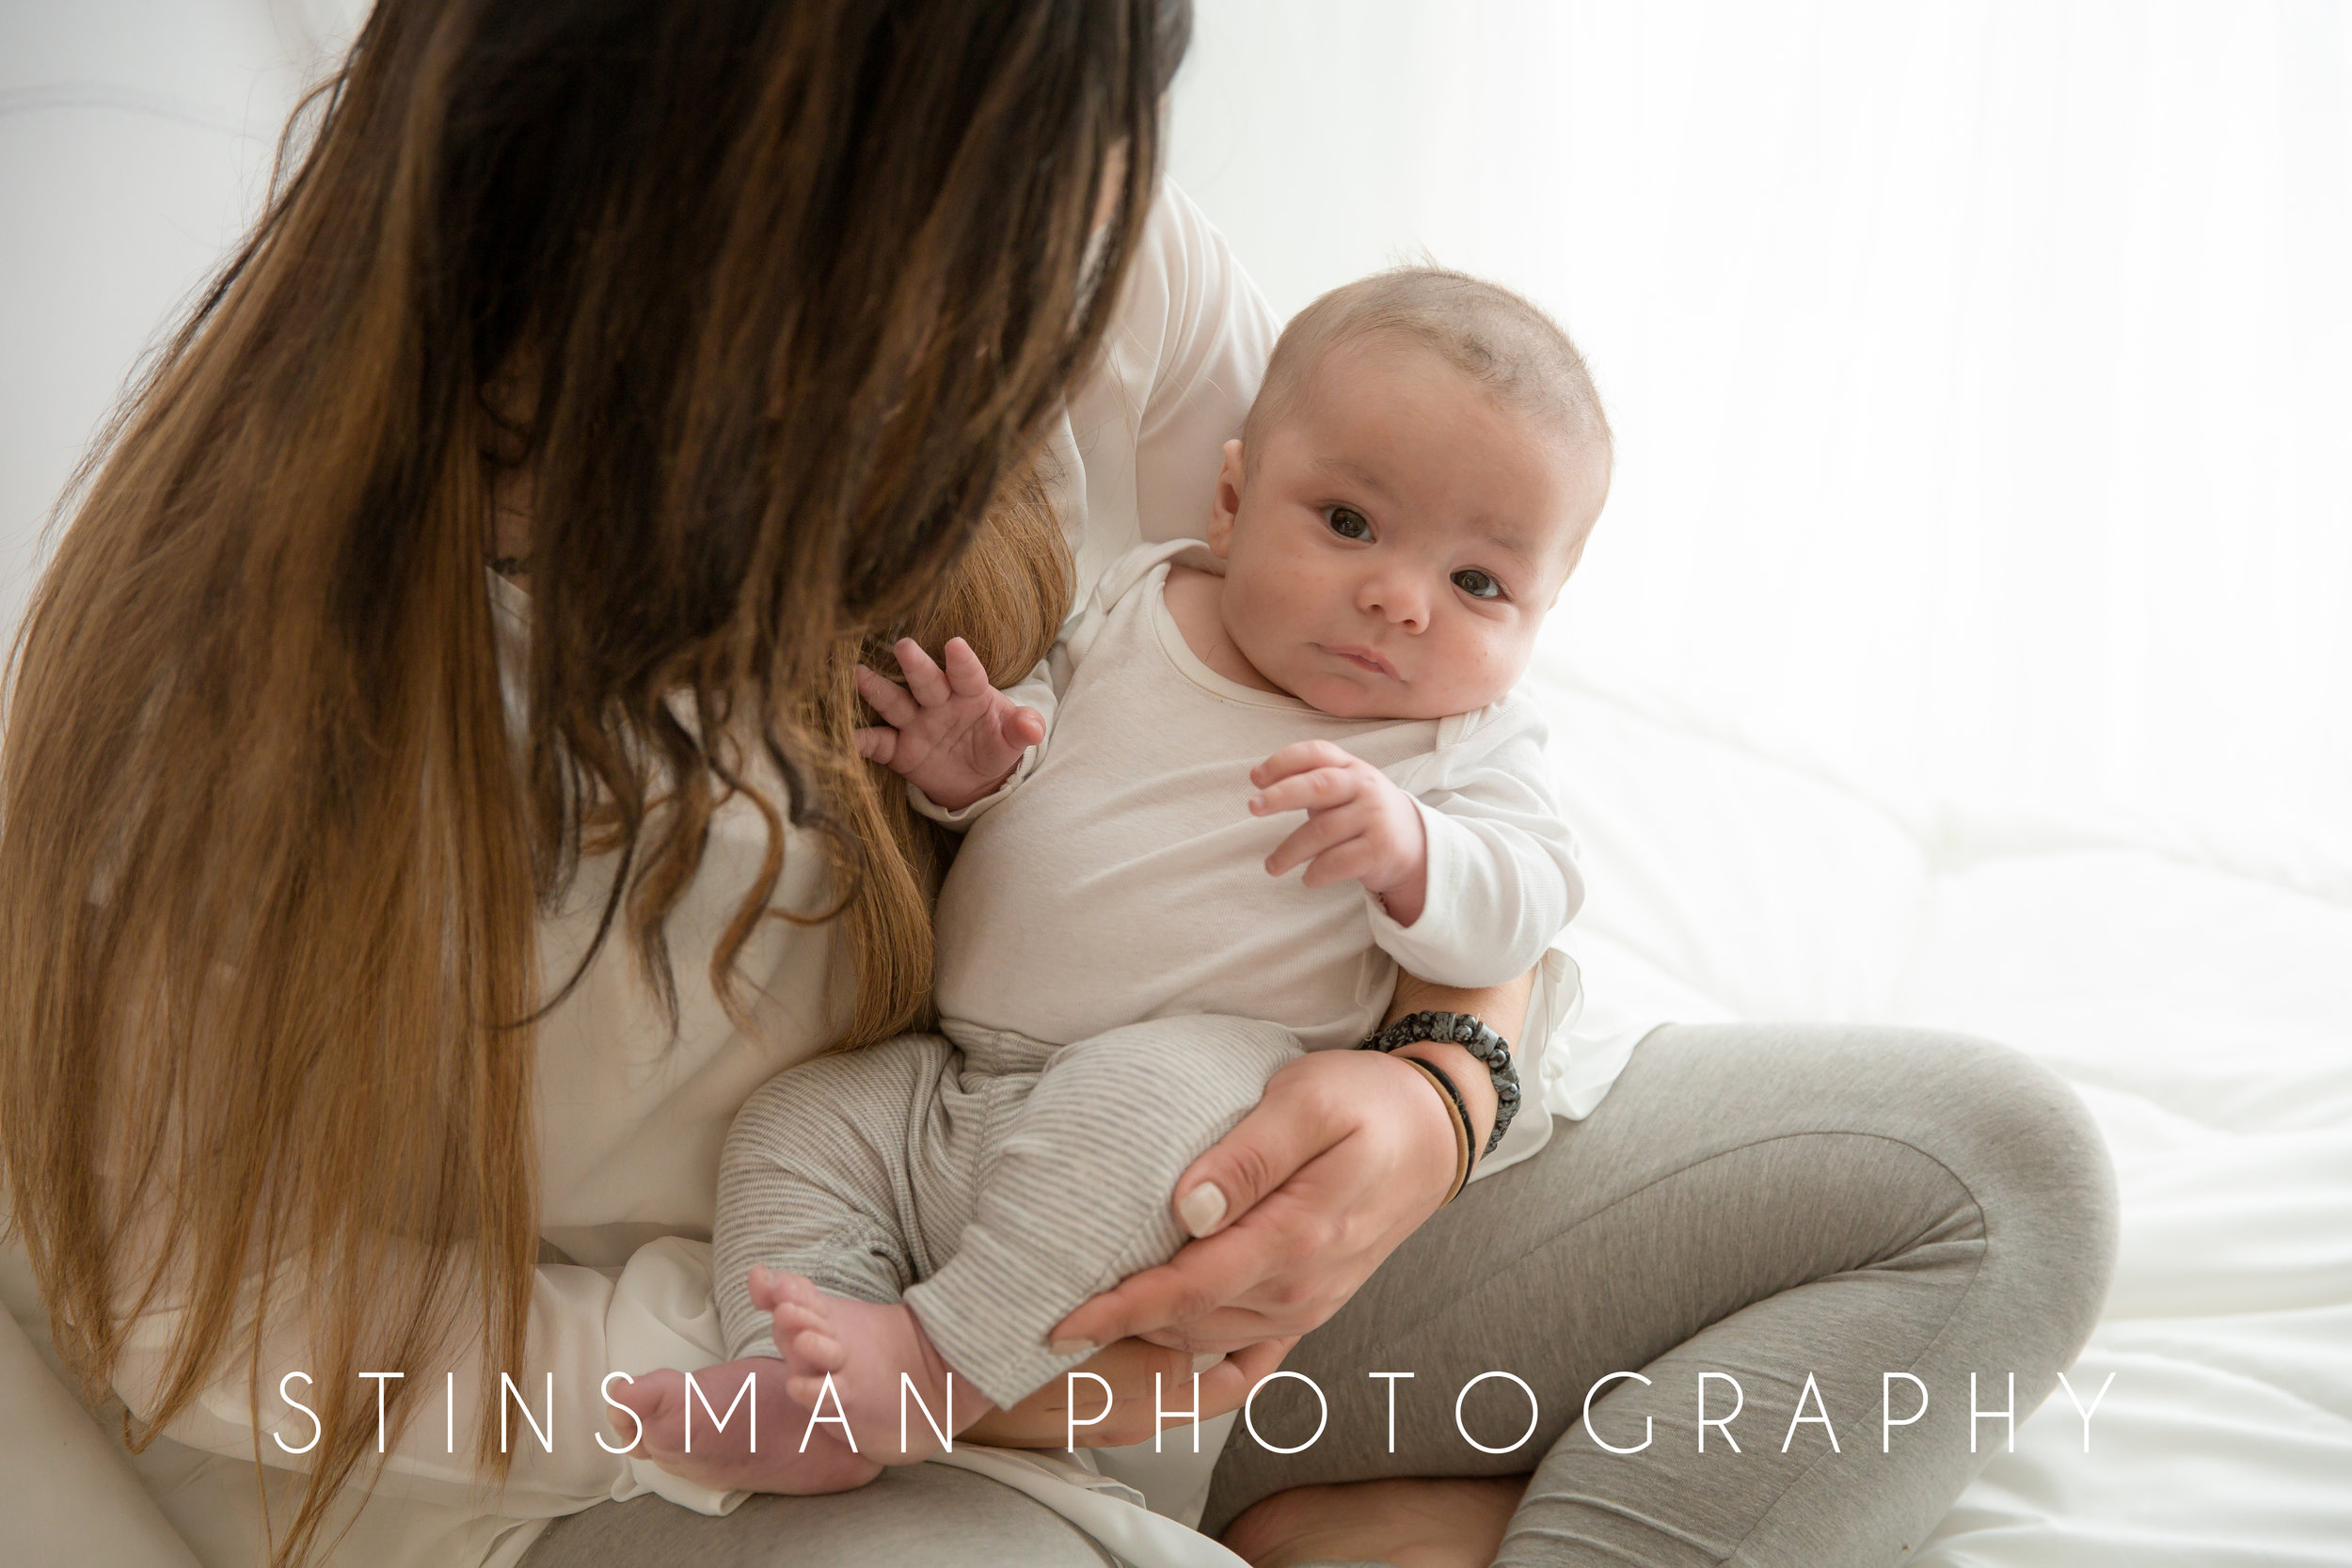 3 month old little boy looking up at the camera in studio in burlington nj with stinsman photography.